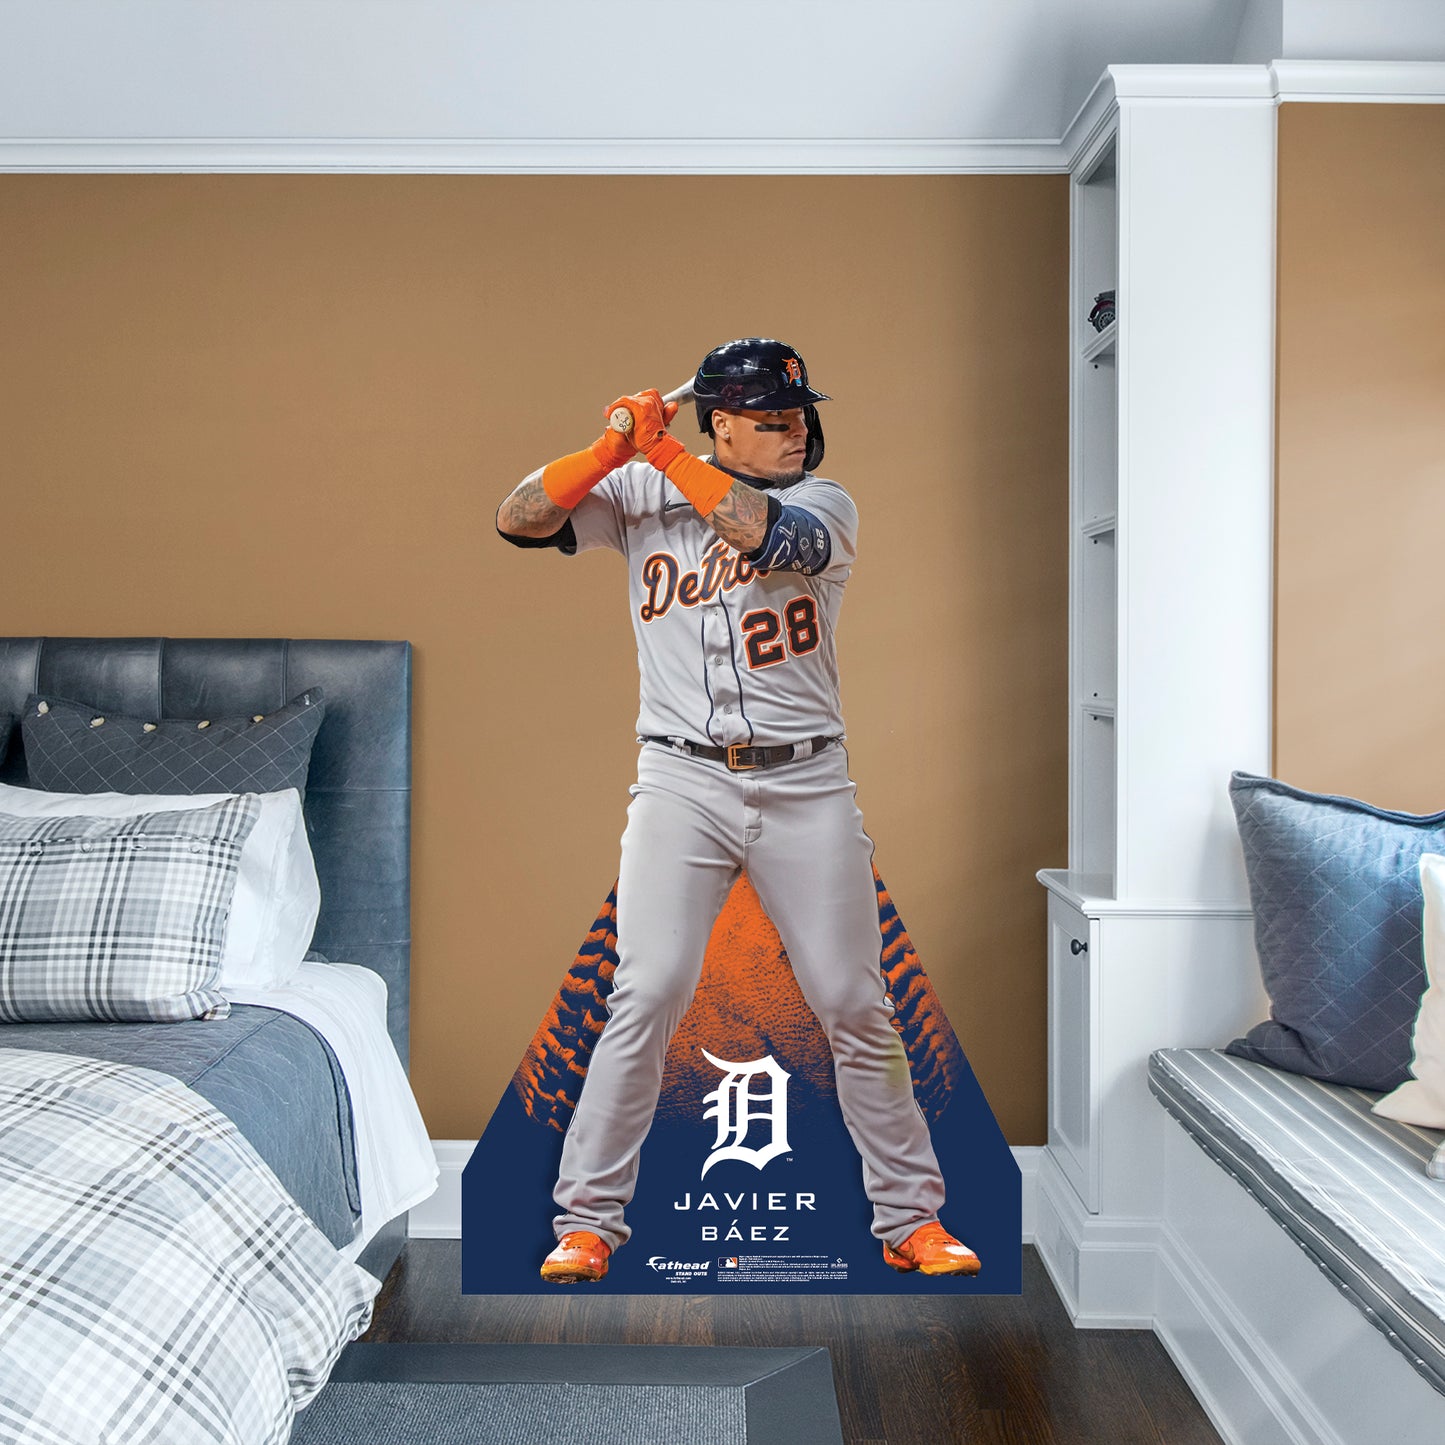 Detroit Tigers: Javier Báez 2022  Life-Size   Foam Core Cutout  - Officially Licensed MLB    Stand Out